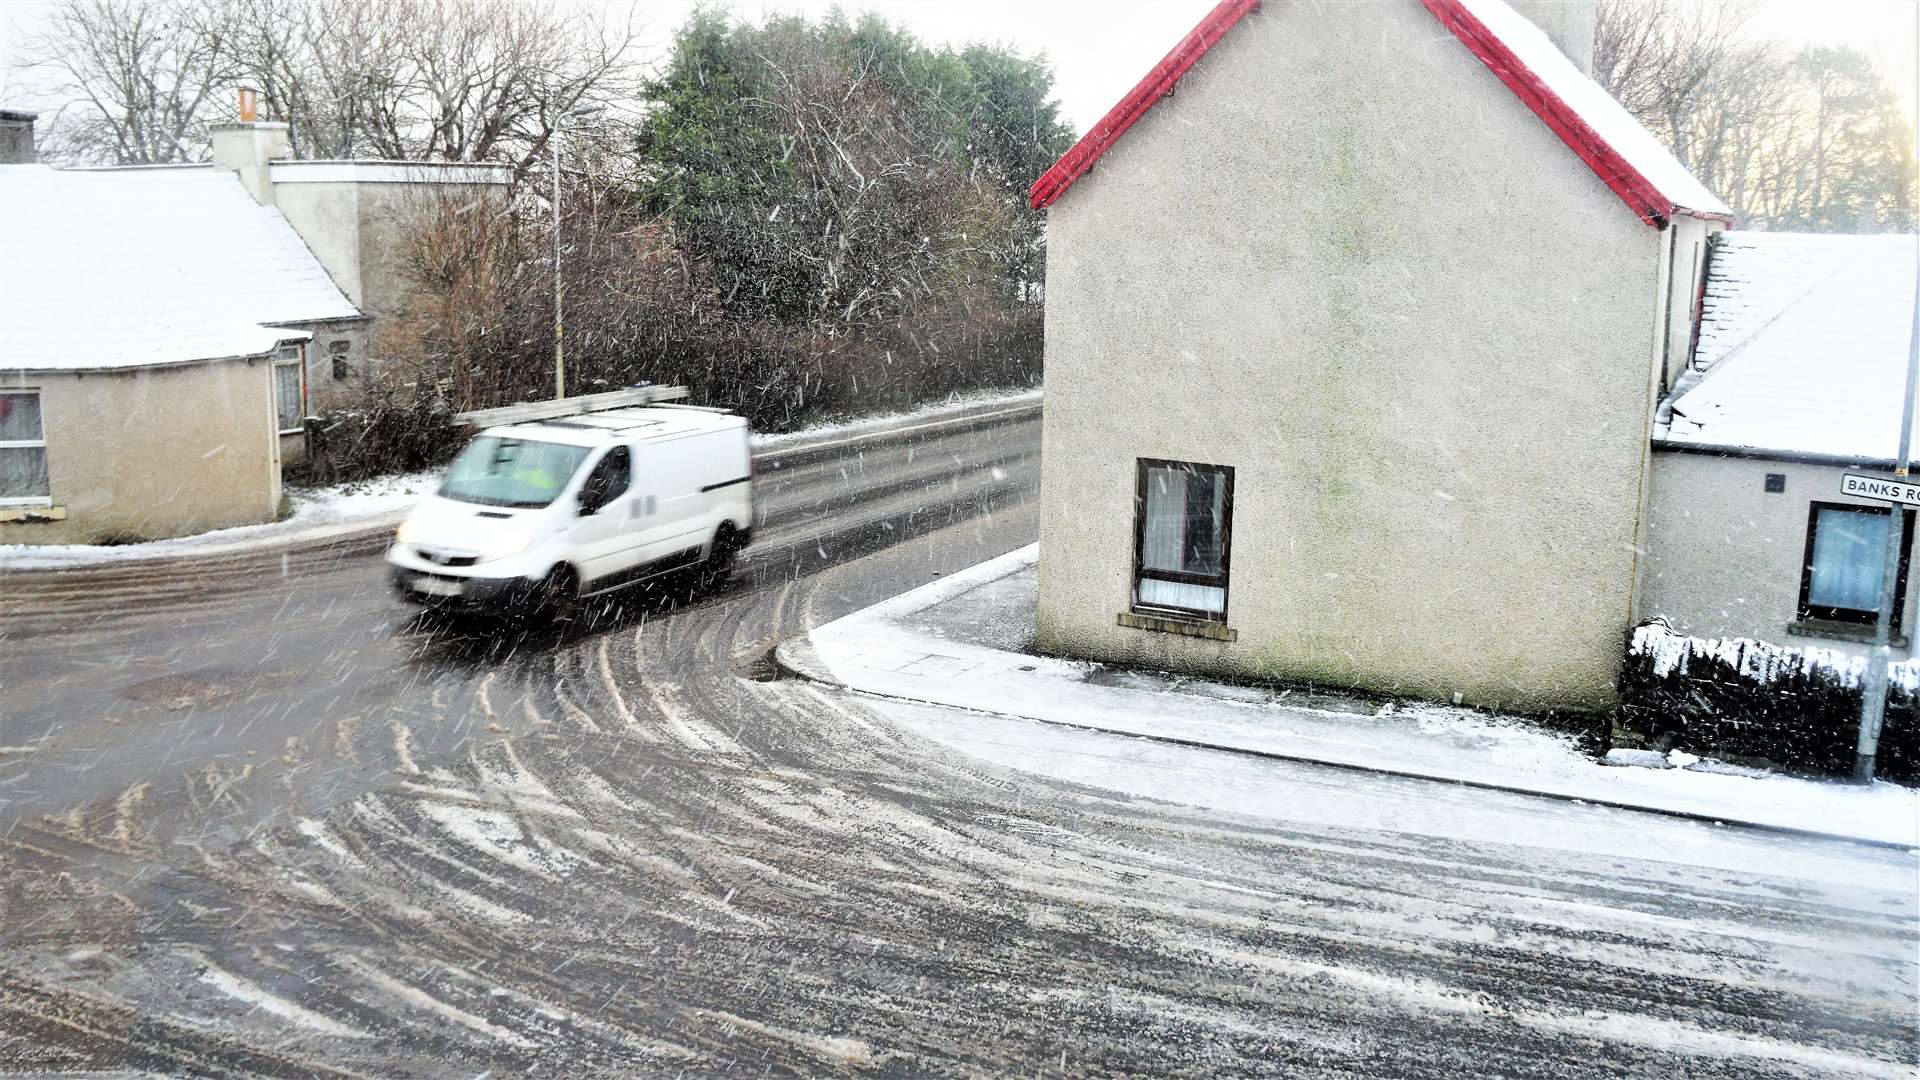 Snow showers in Watten this morning. Picture: DGS